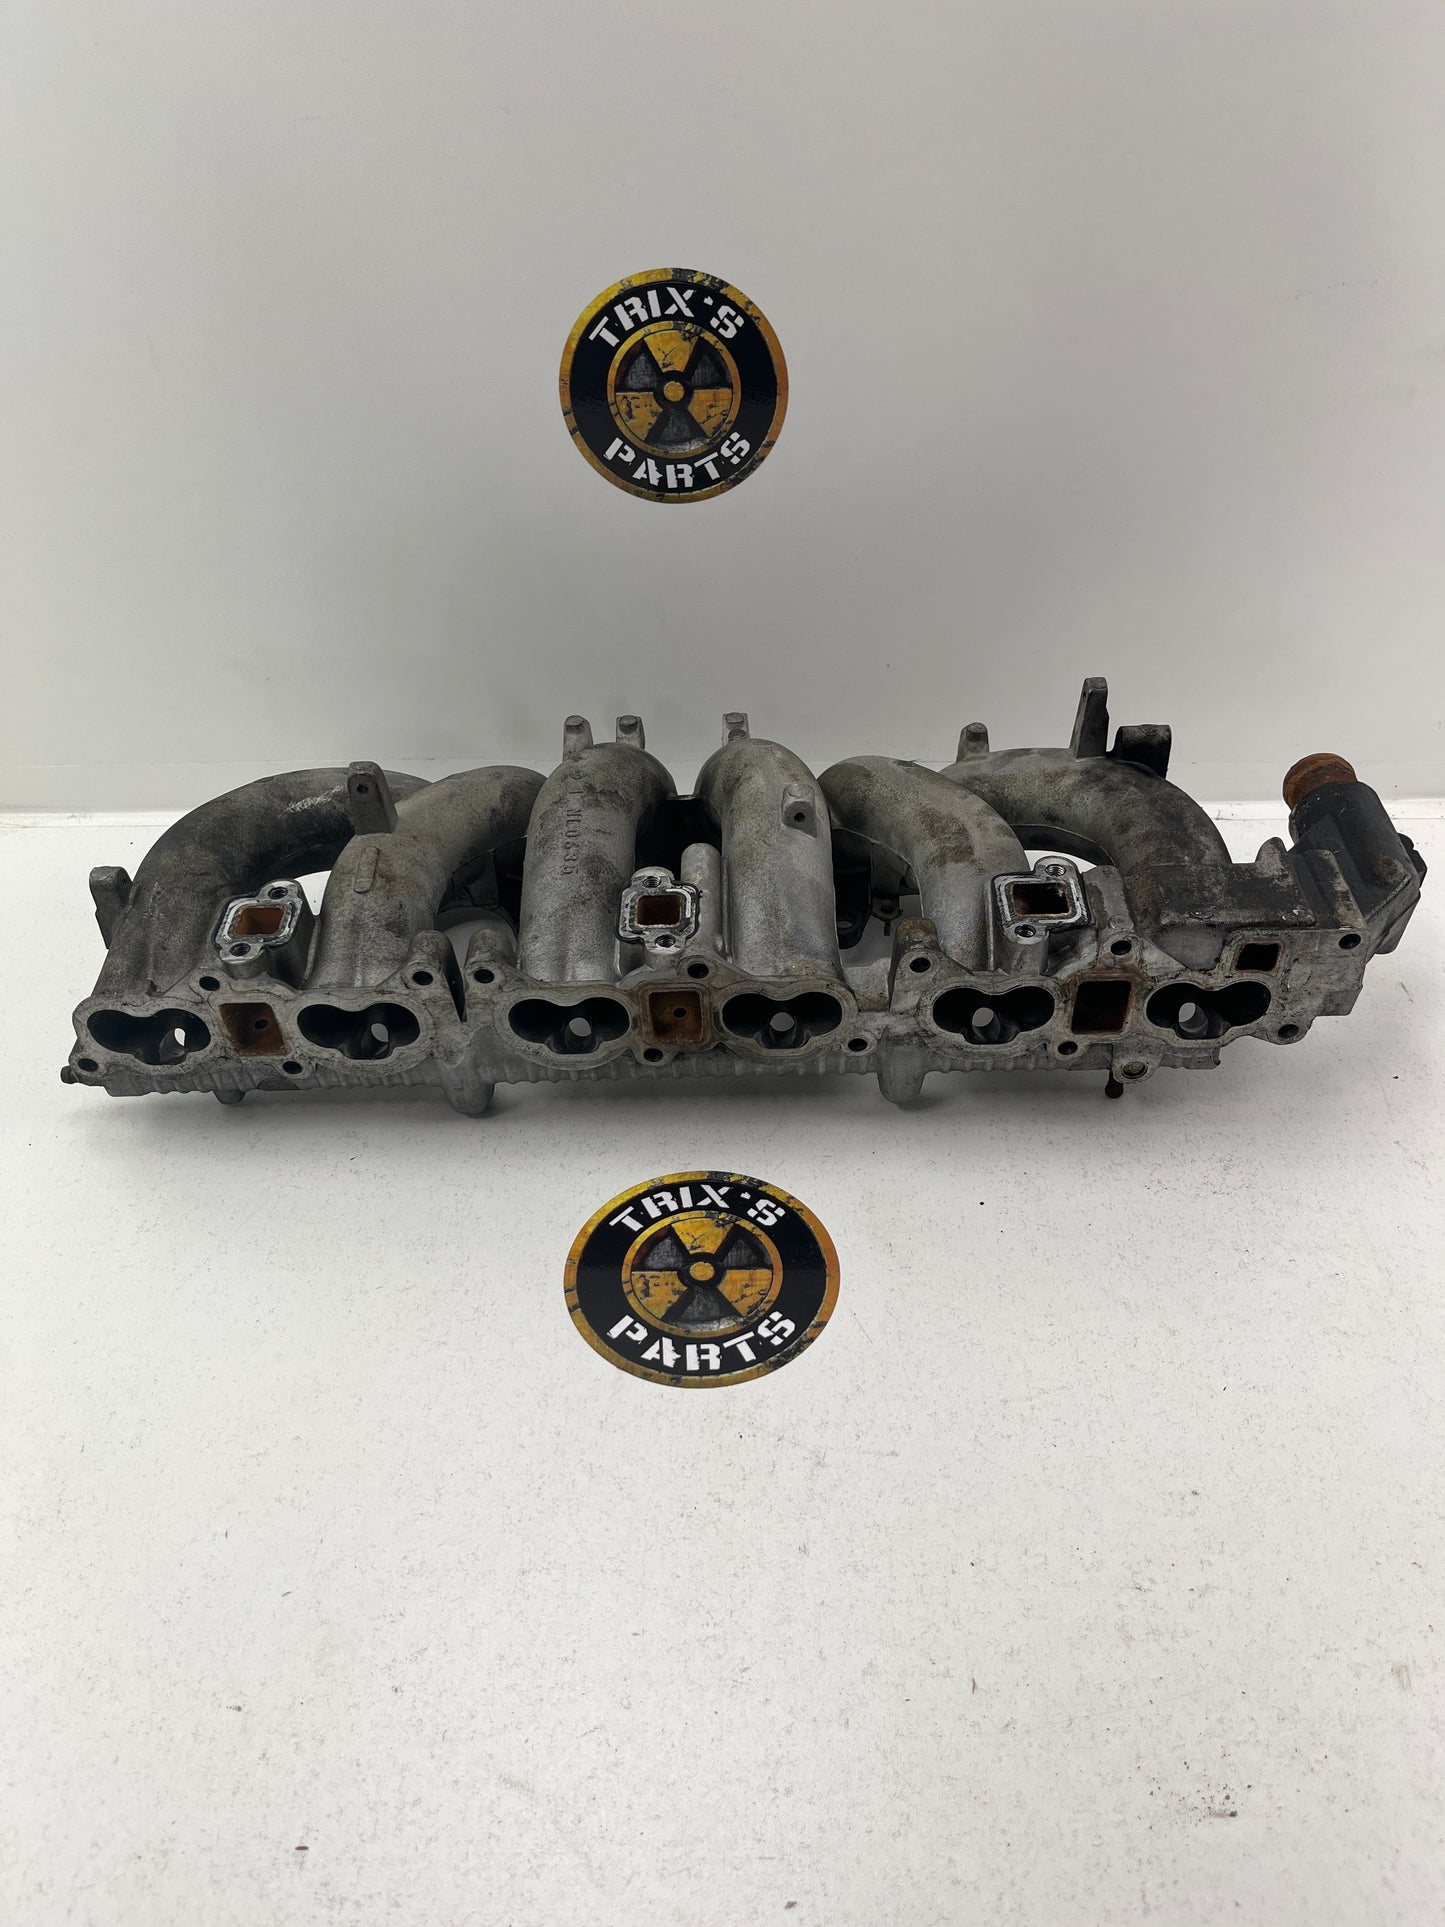 Used Bottom Bare Intake Manifold to Suit RB25DET and RB25DE Engines